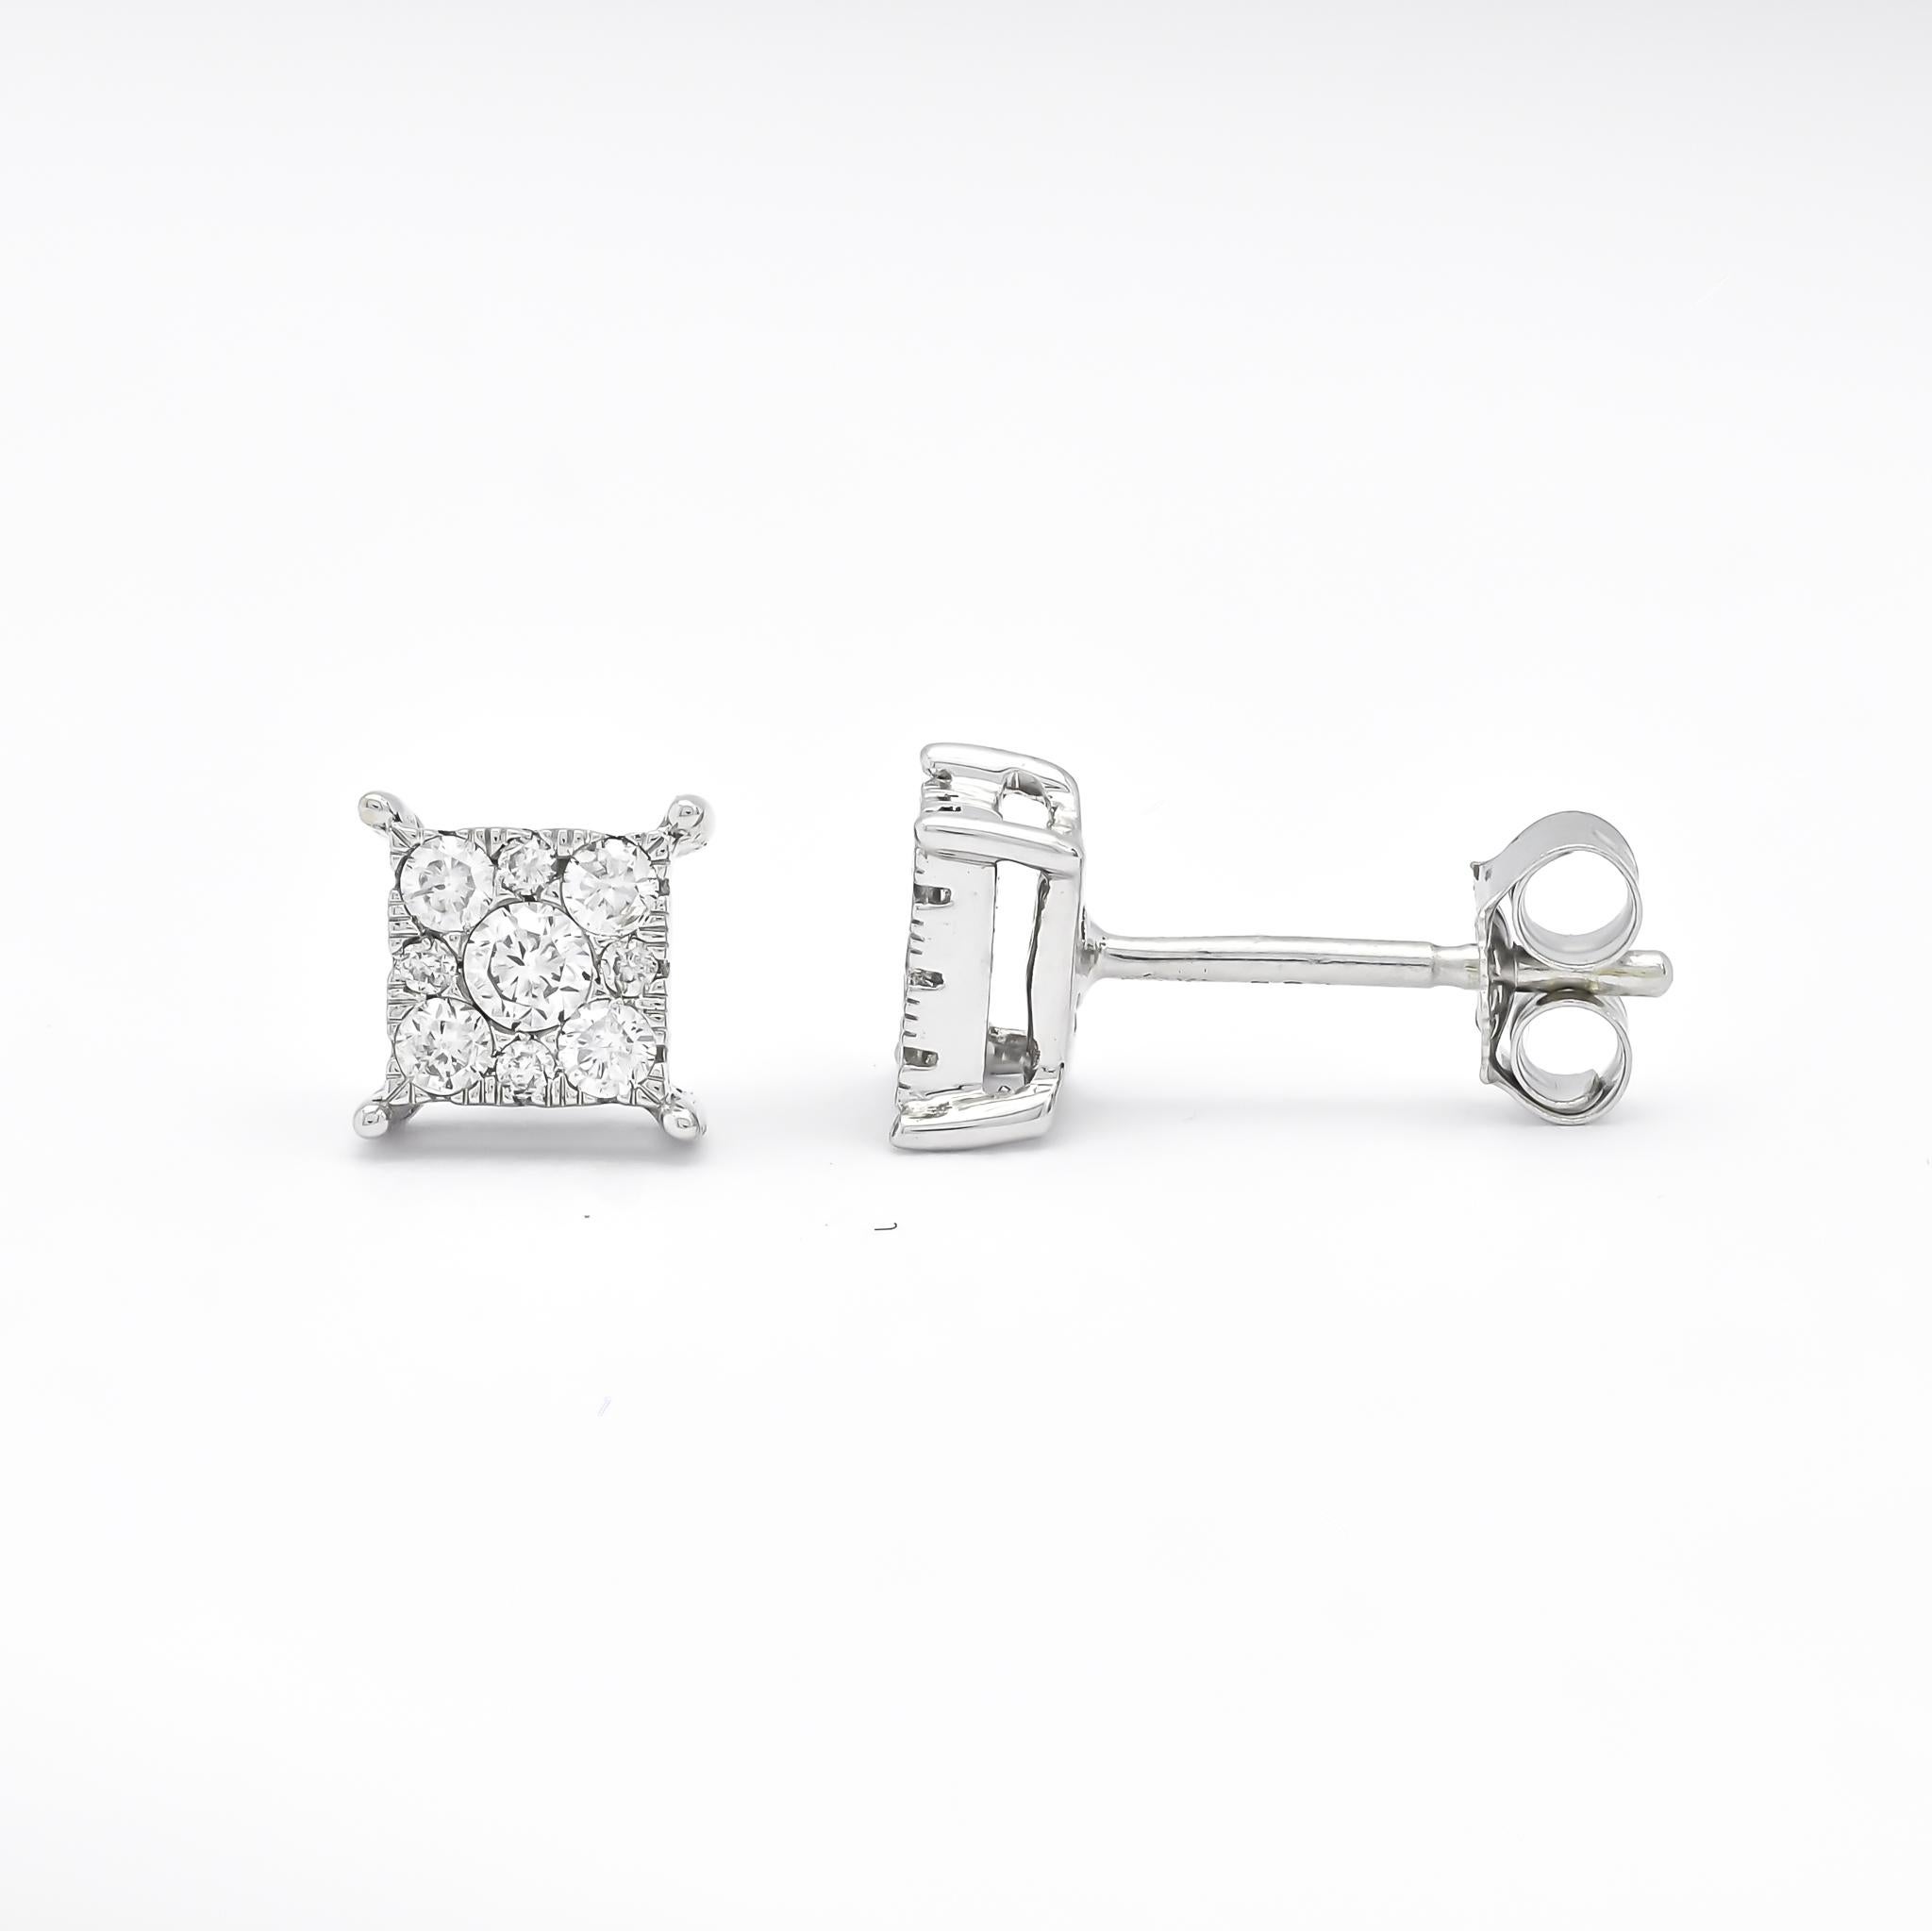 This Unique Cluster of round diamonds is set up in Square Shape giving it an illusion of a  Princess Cut Diamond. Solitaire Cluster Stud earrings are perfectly balanced pieces that announce your sense of refinement and class.  It is a classic stud